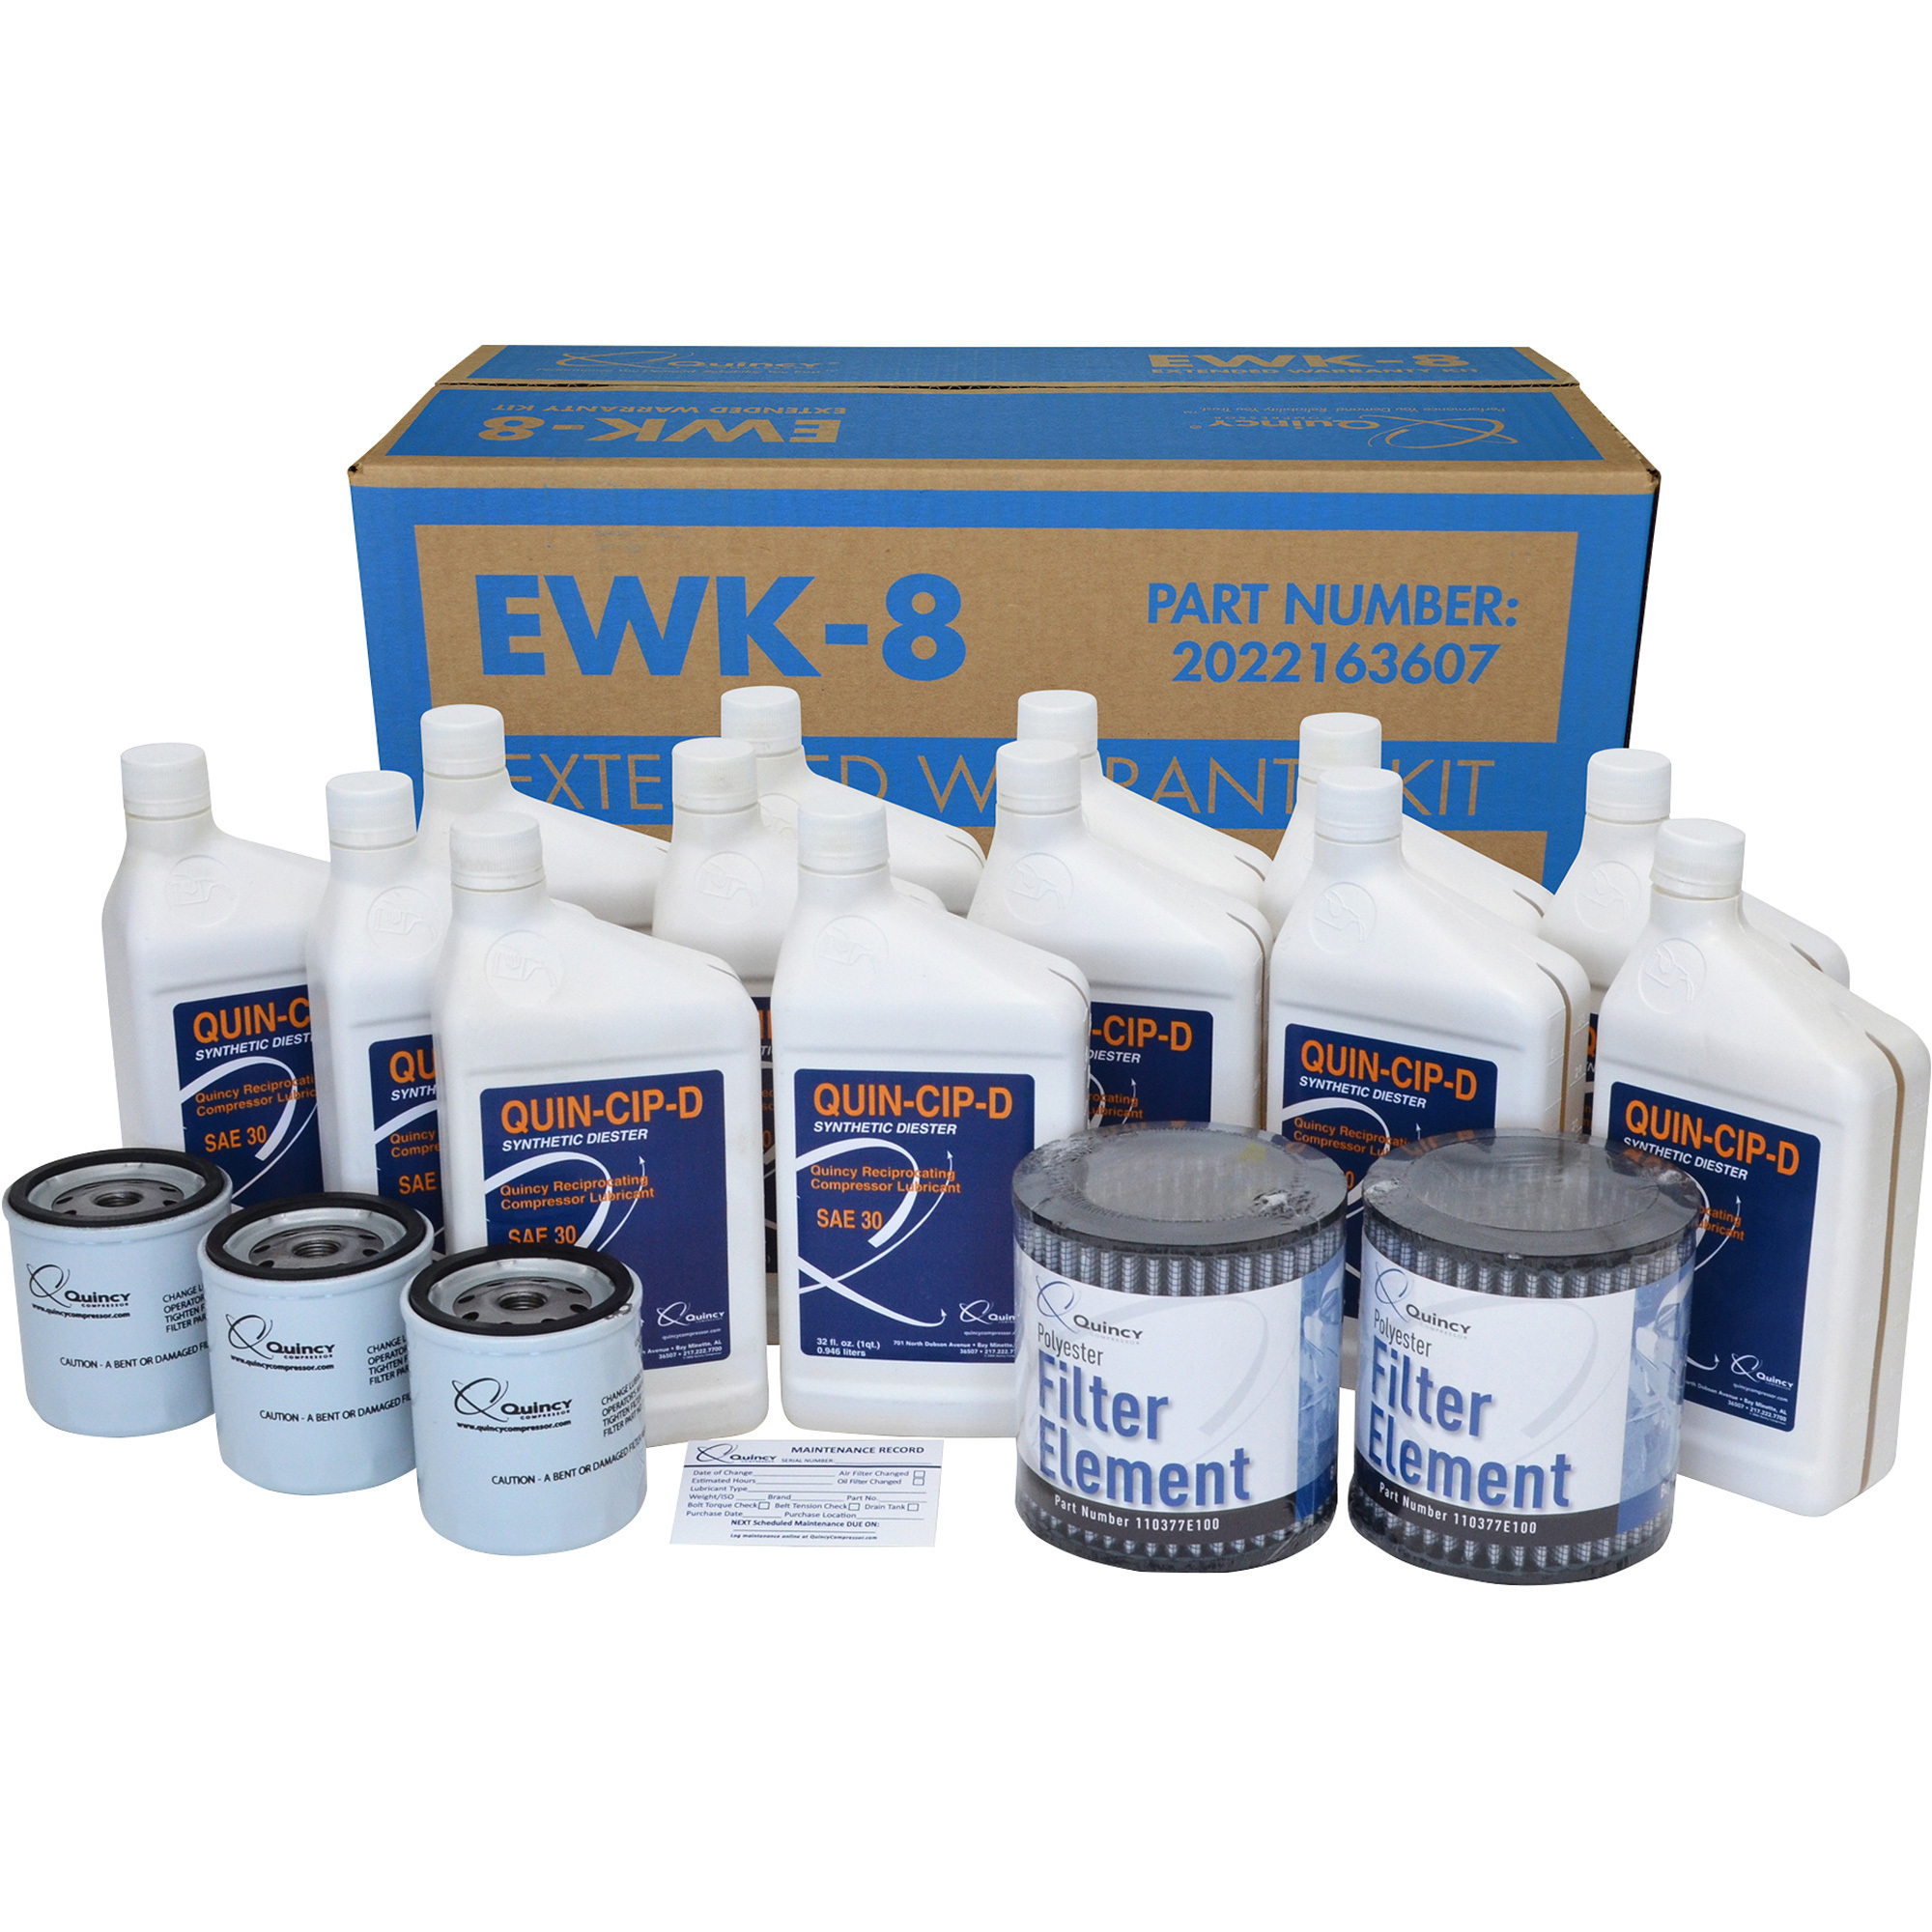 Quincy Extended Plus Support and Maintenance Kit, For Quincy QP 15 HP Compressors, Model EWK-8